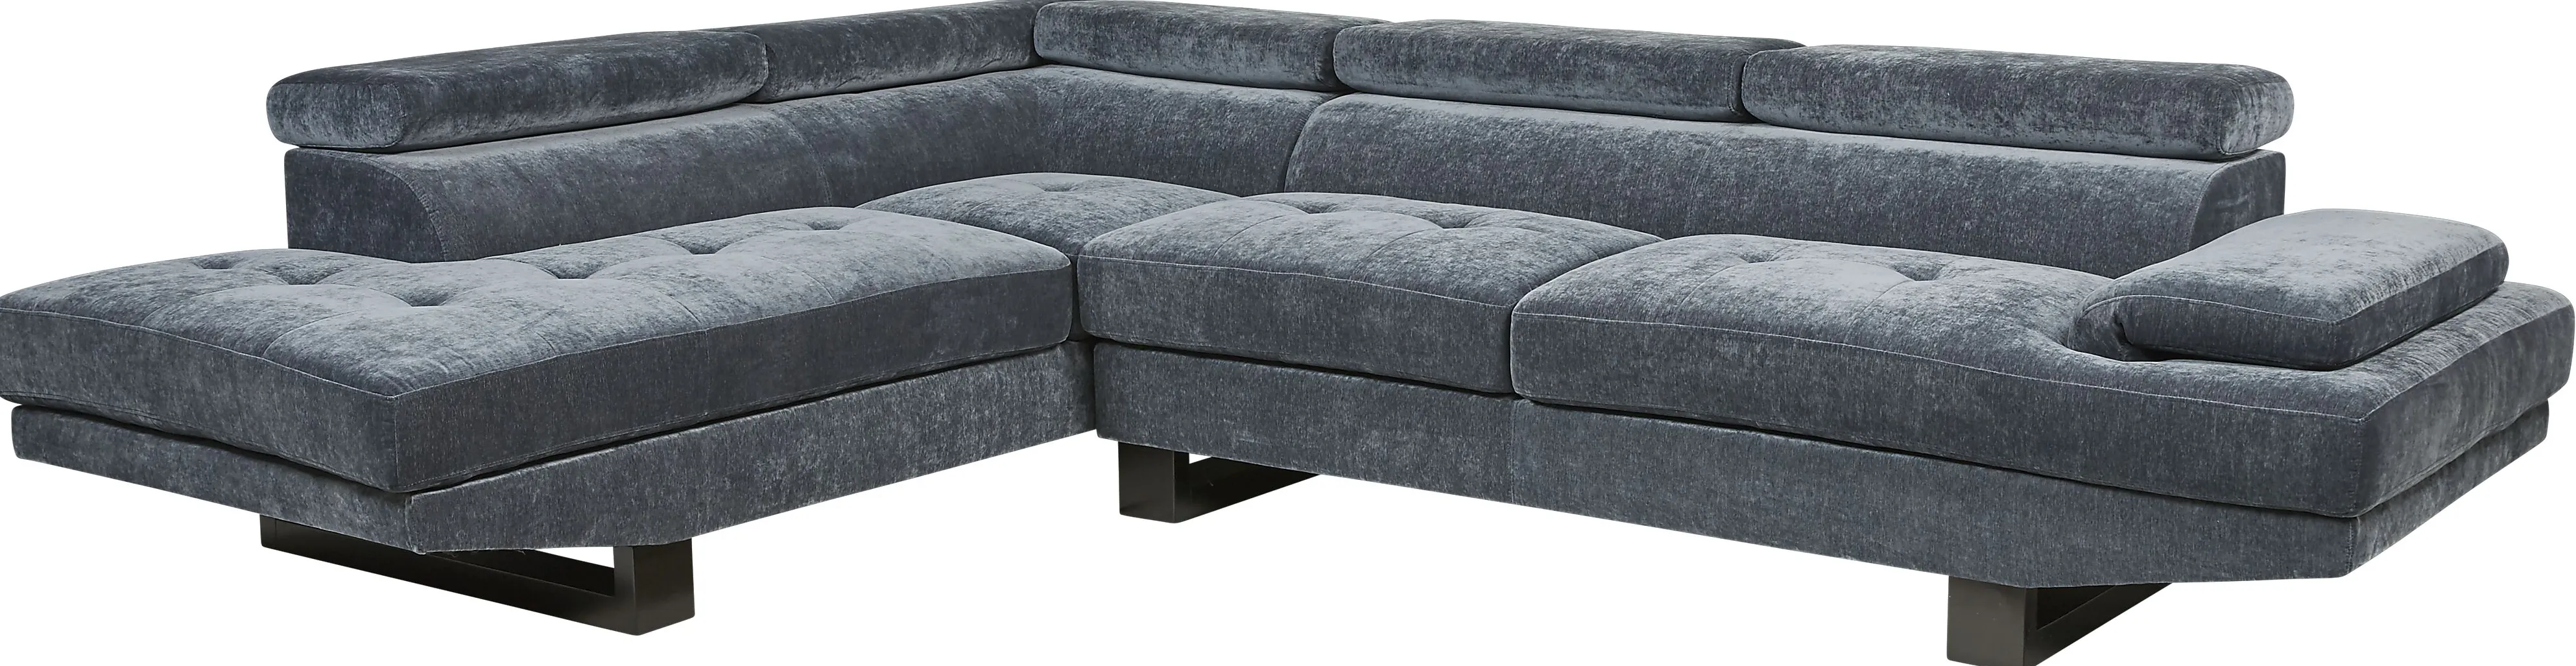 Northside Ocean 2 Pc Sectional